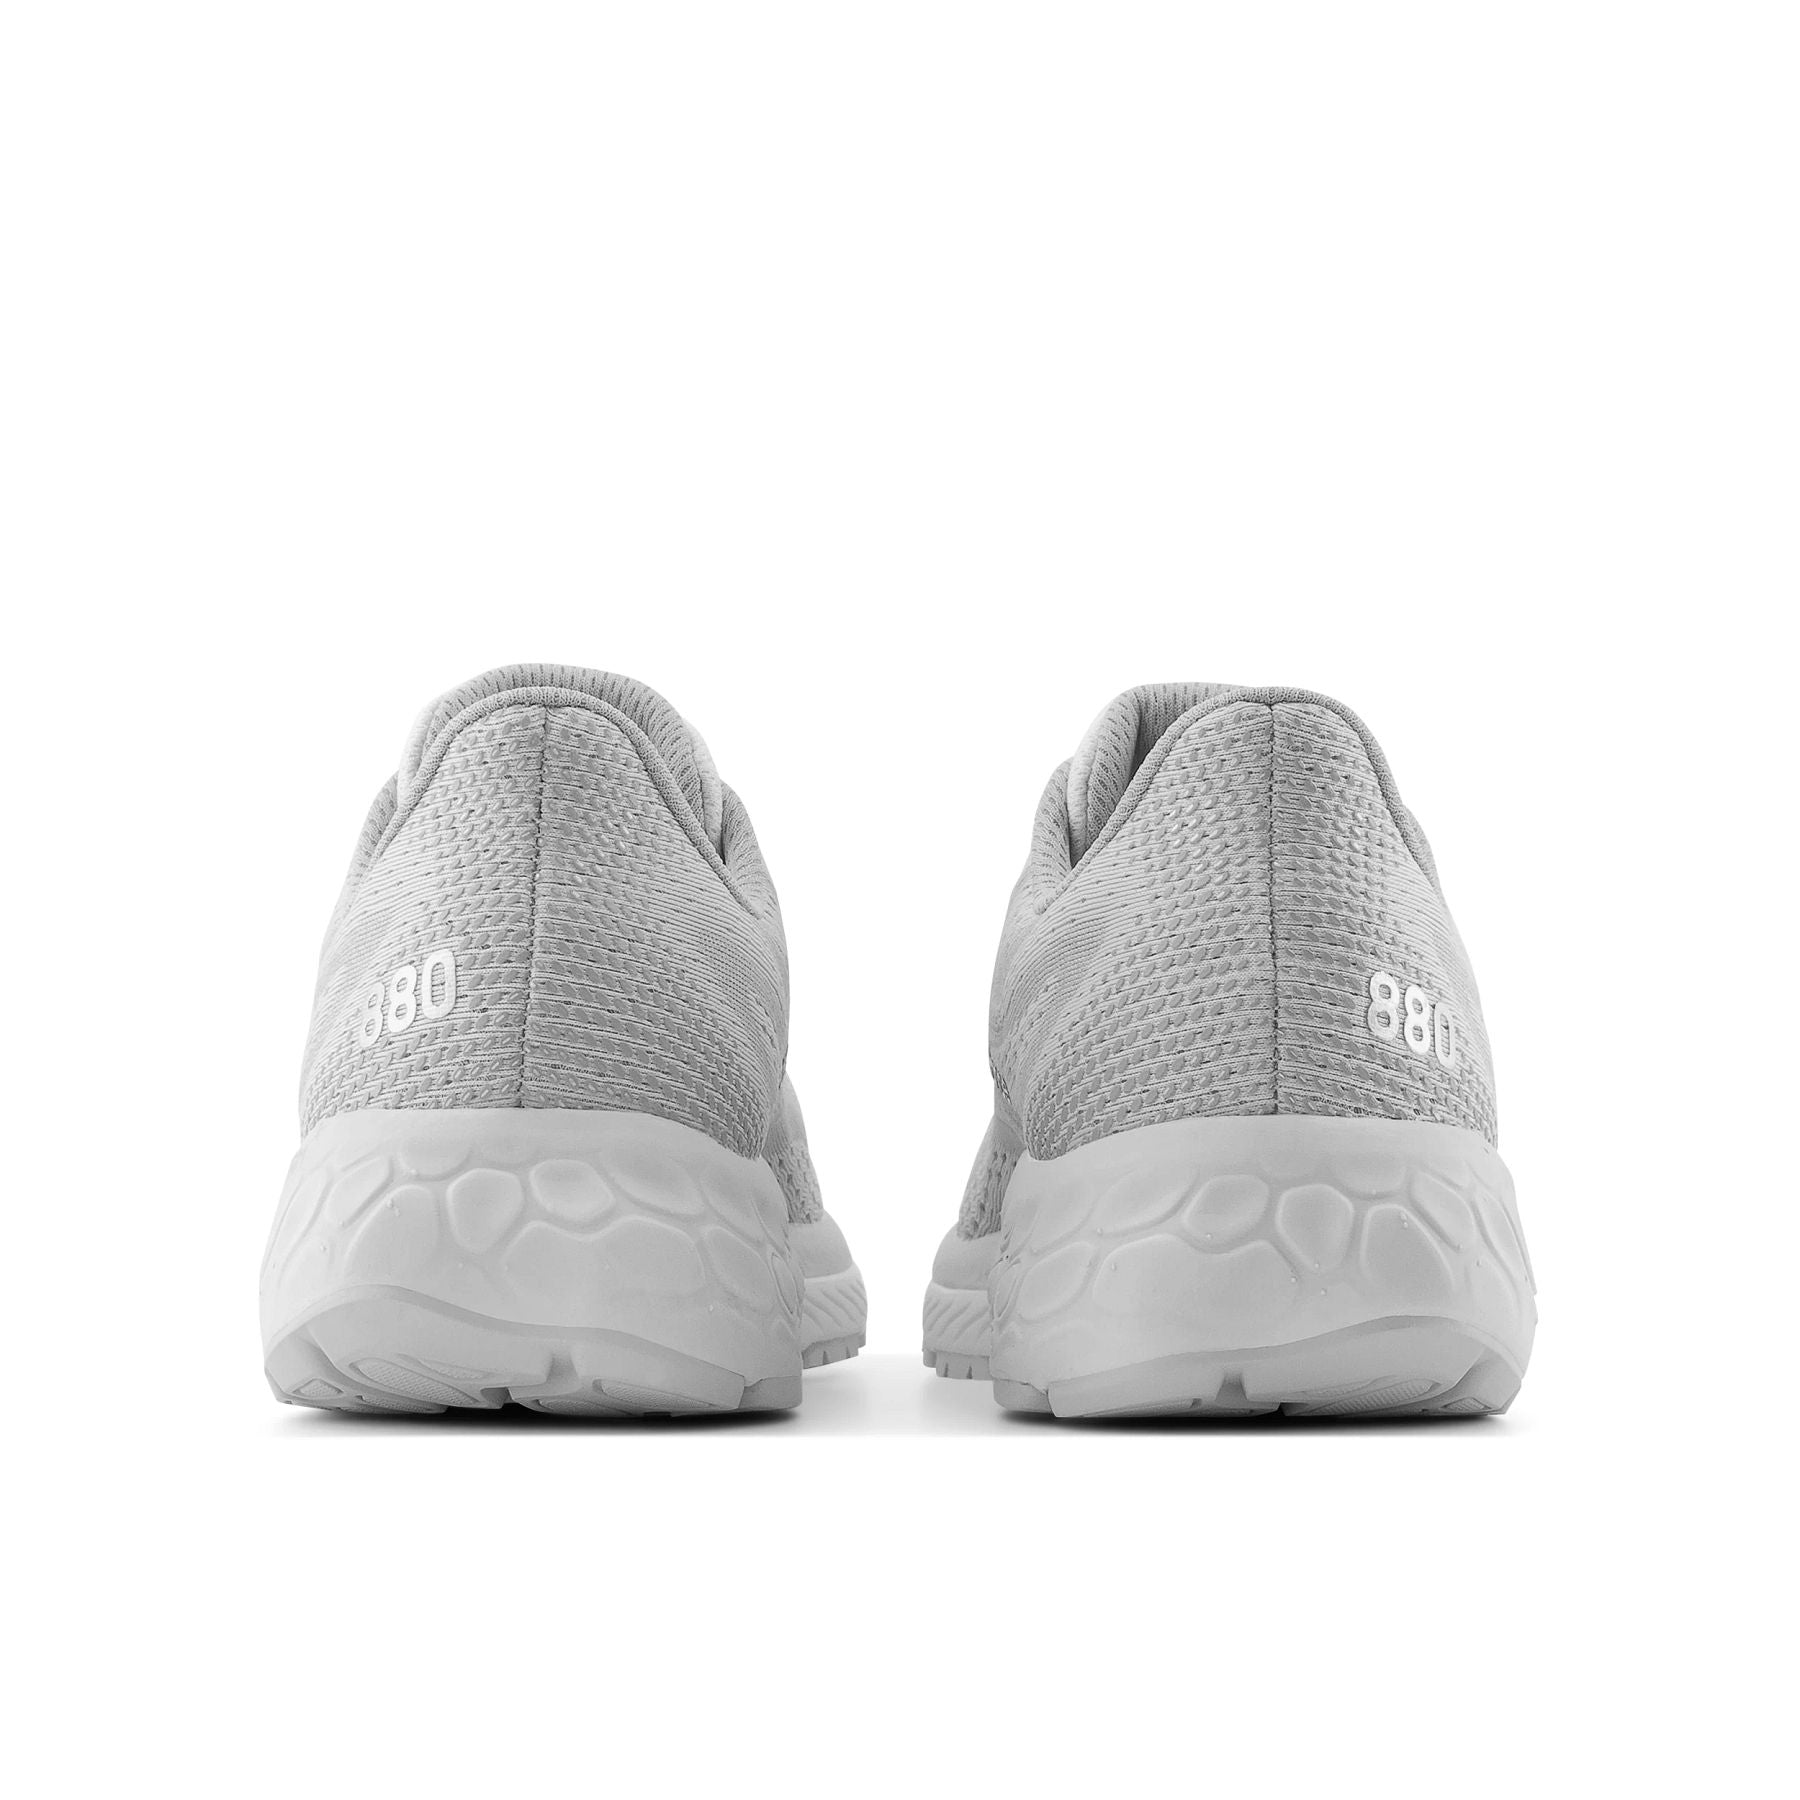 Back view of the Women's 880 V13 by New Balance in the color White/White